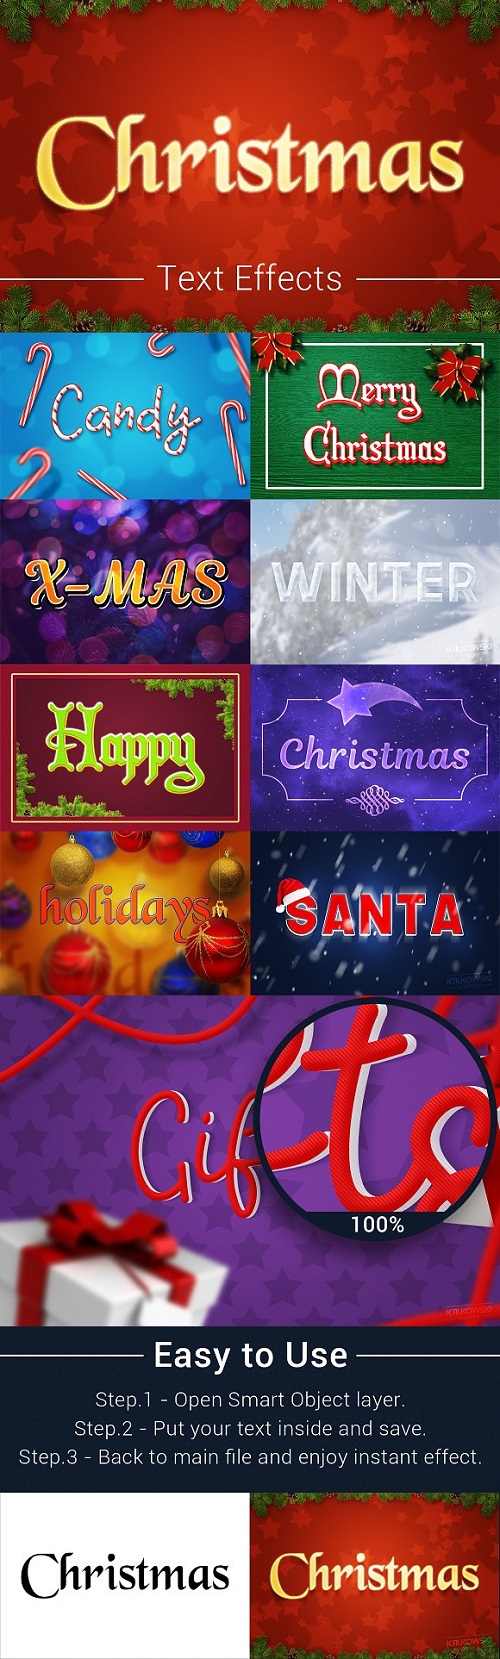 Christmas Text Effects Mockup 2162269